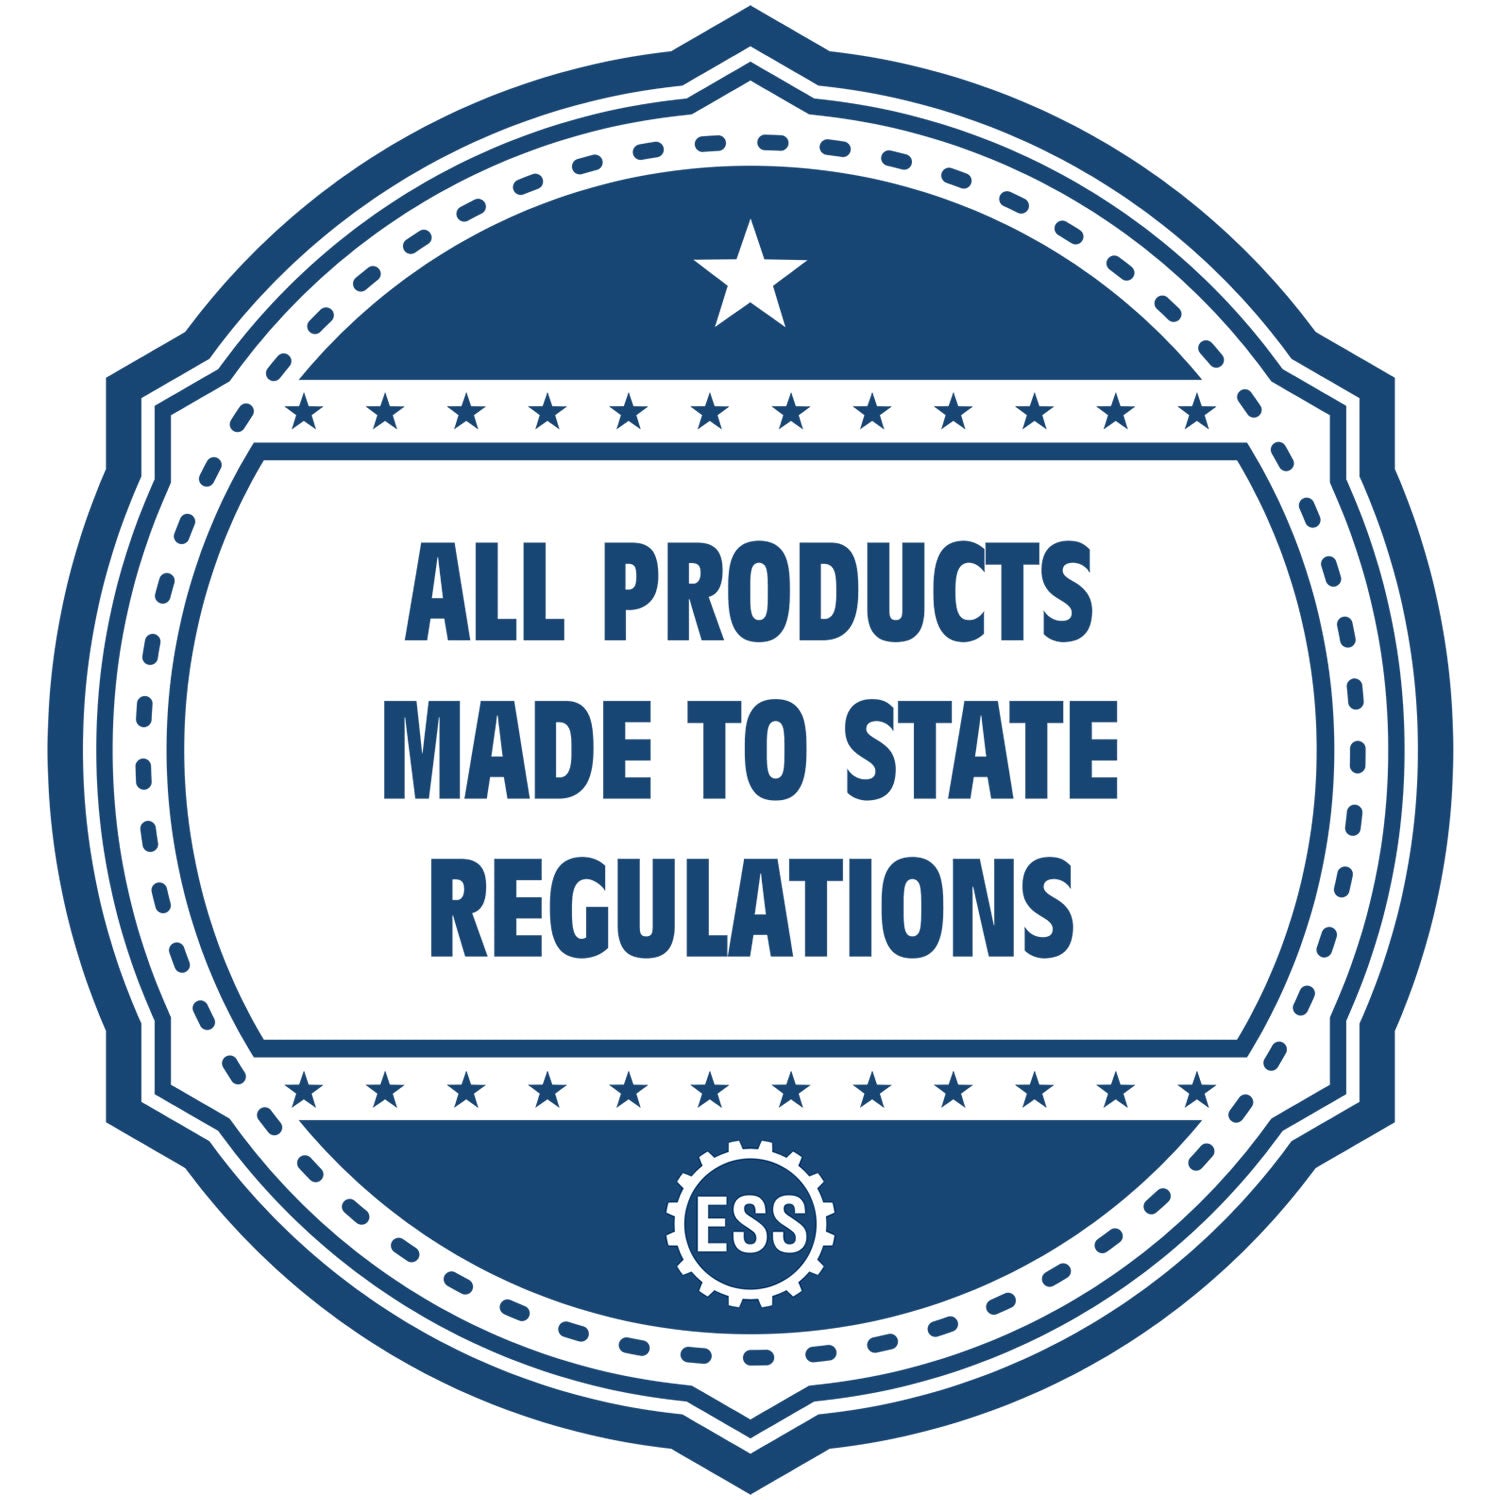 An icon or badge element for the Connecticut Desk Landscape Architectural Seal Embosser showing that this product is made in compliance with state regulations.